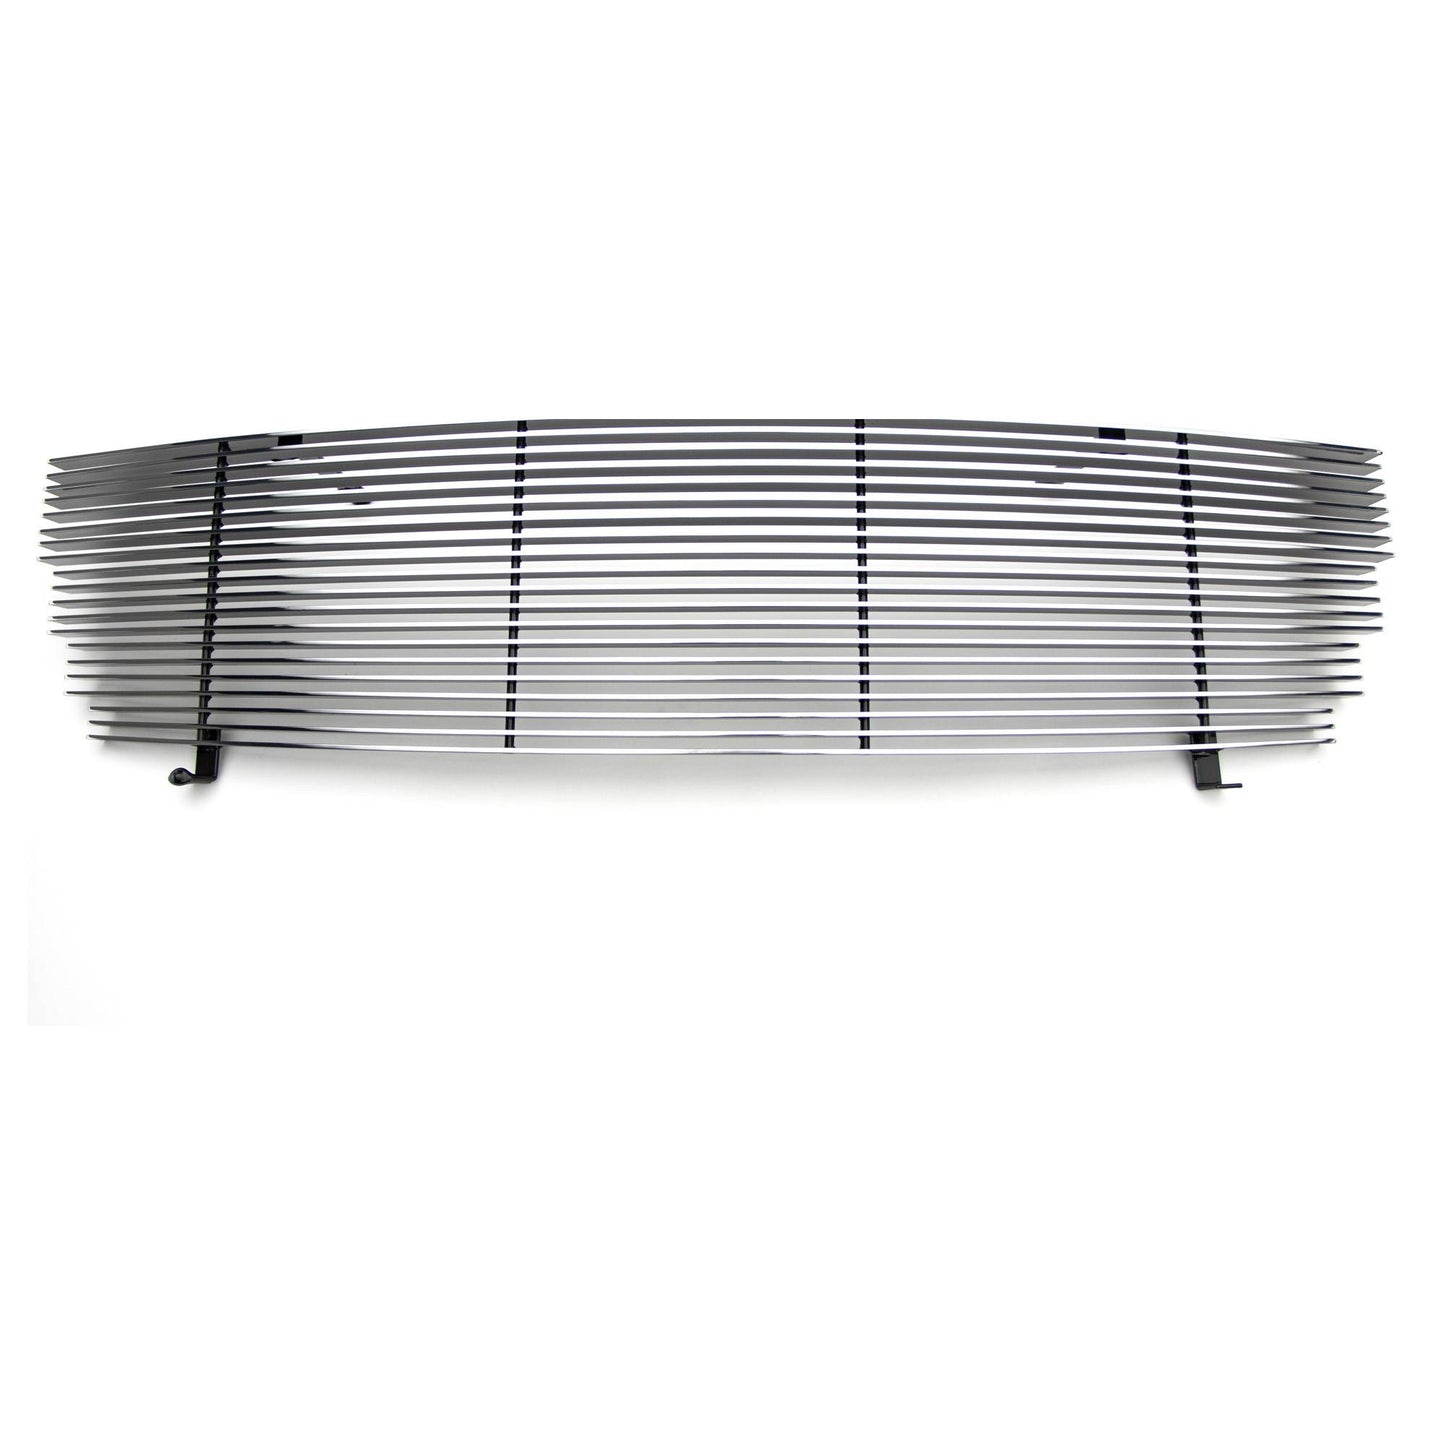 T-REX Grilles 20580 Polished Aluminum Horizontal Grille Fits 1997-2002 Ford Expedition